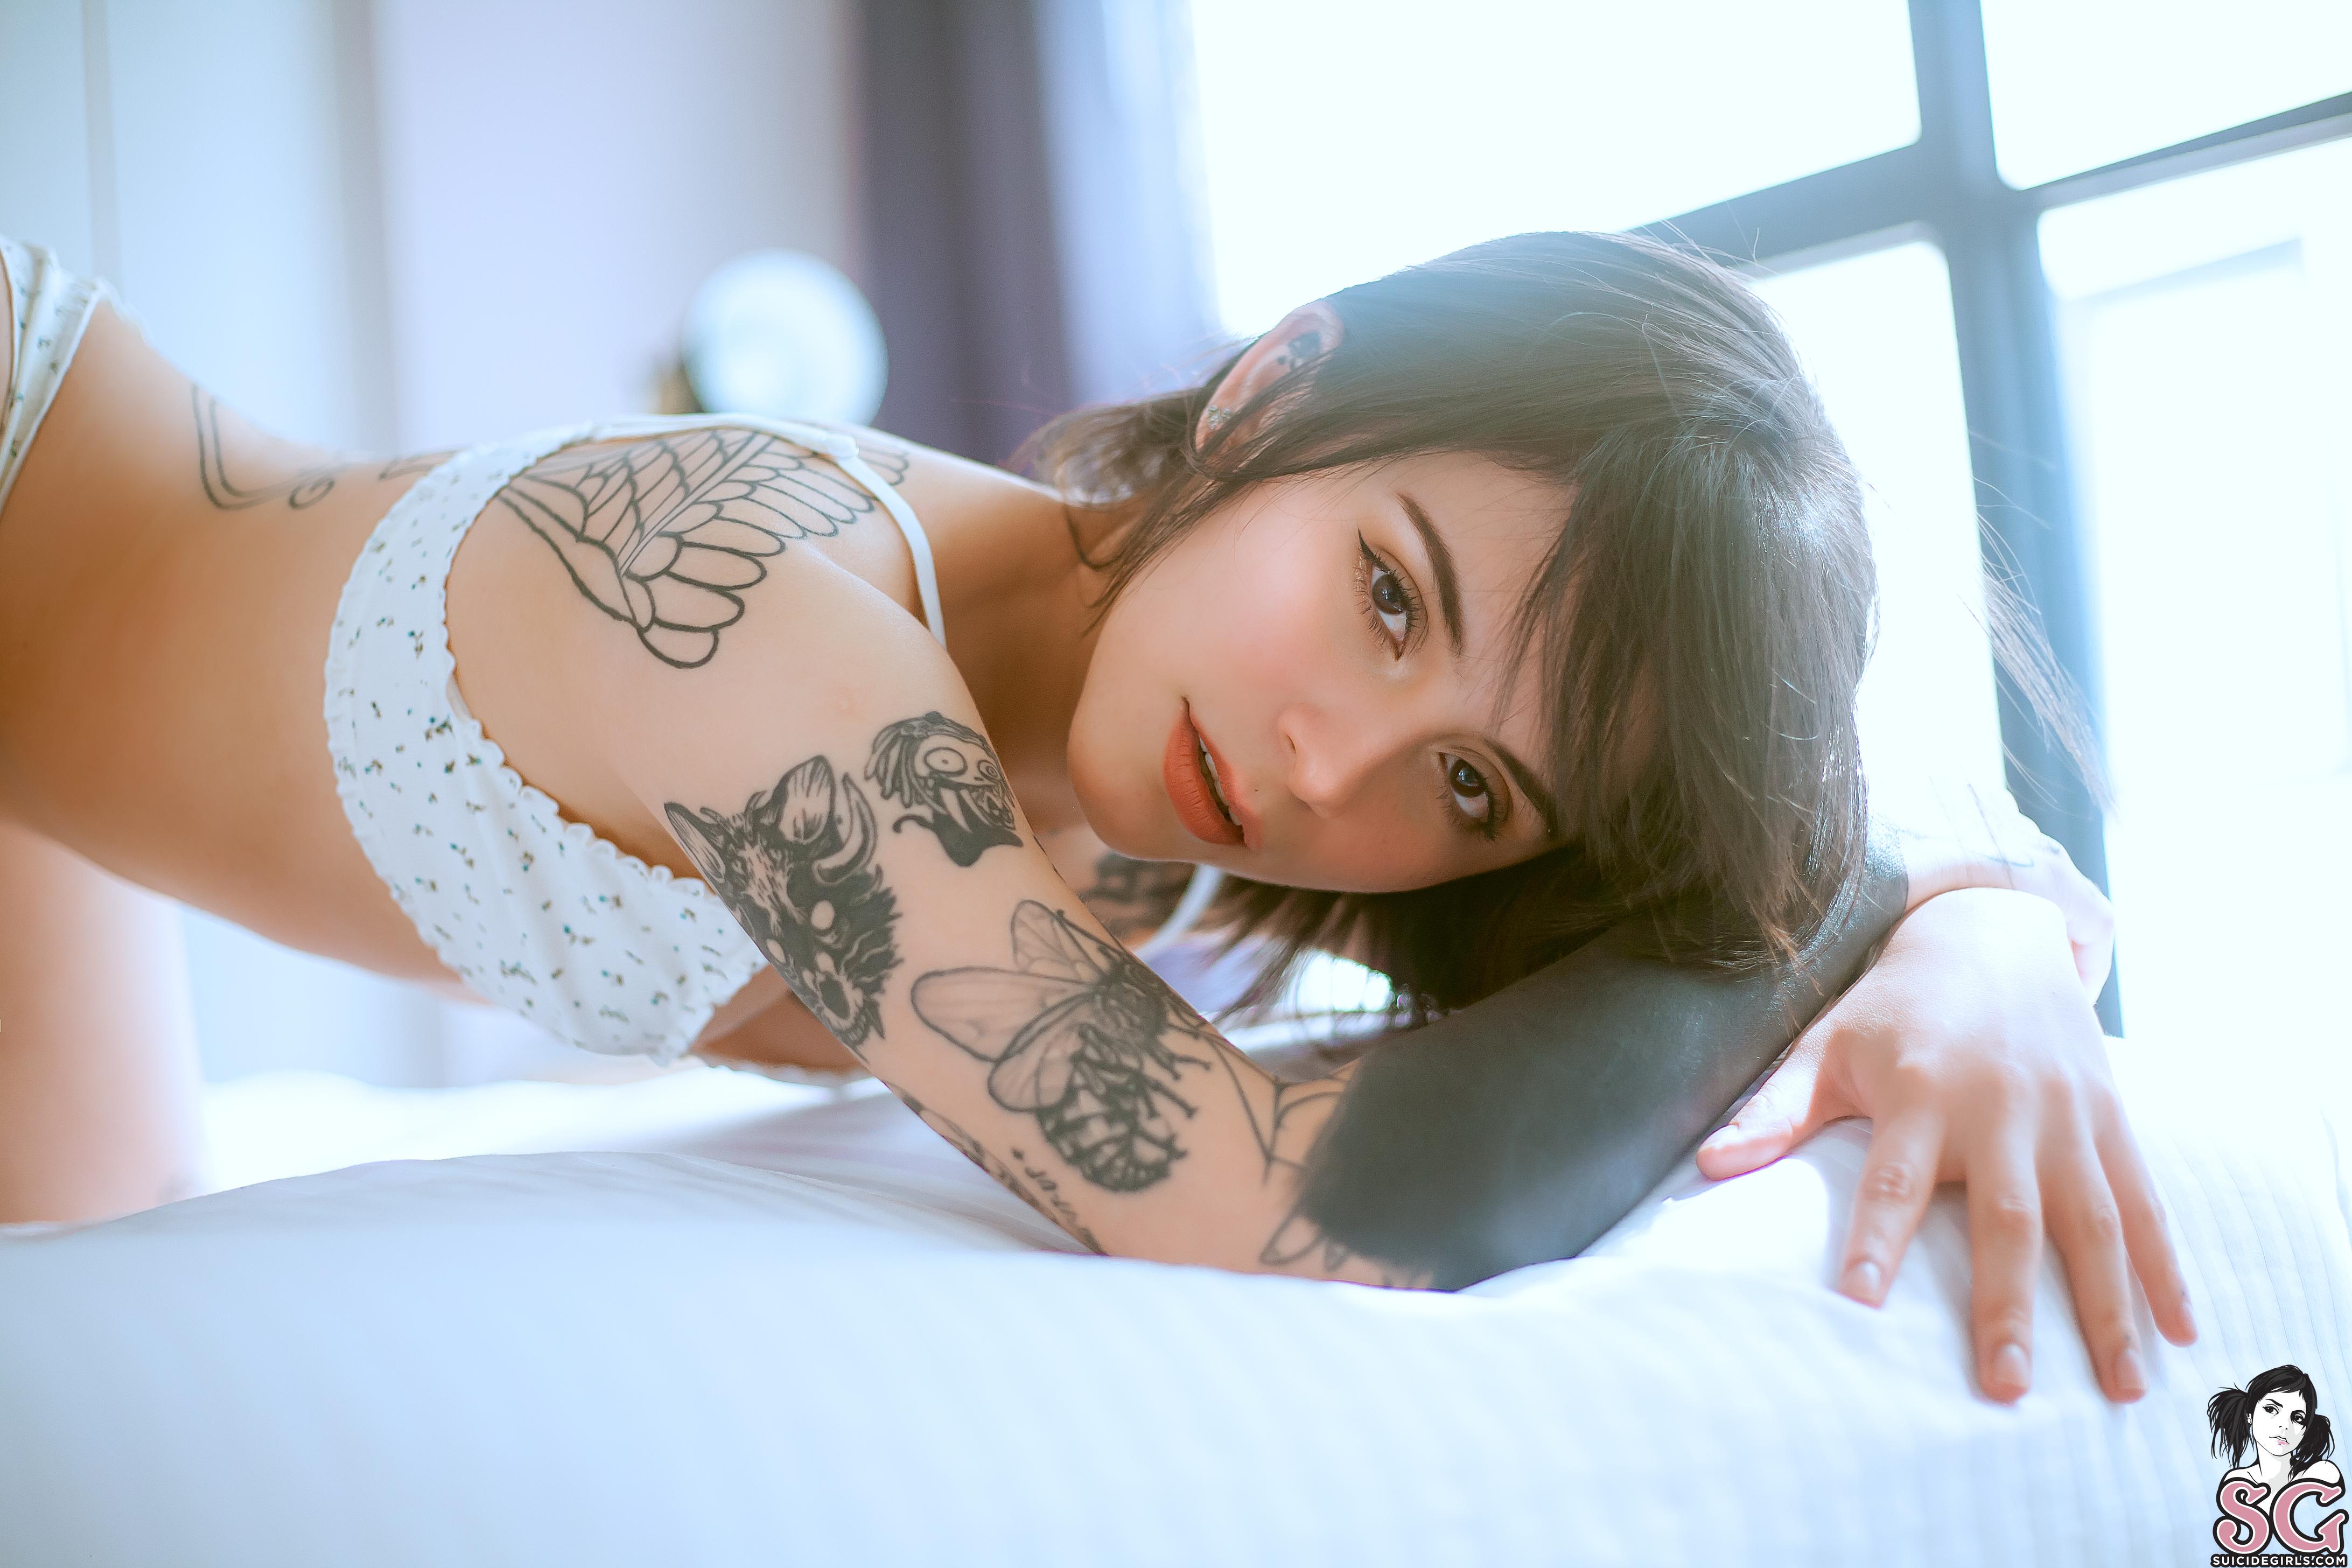 People 4368x2912 Mina Suicide brunette Mexican Women model Suicide Girls women inked girls tattoo blurred face kneeling bokeh eyelashes brown eyes in bed looking at viewer overexposed watermarked